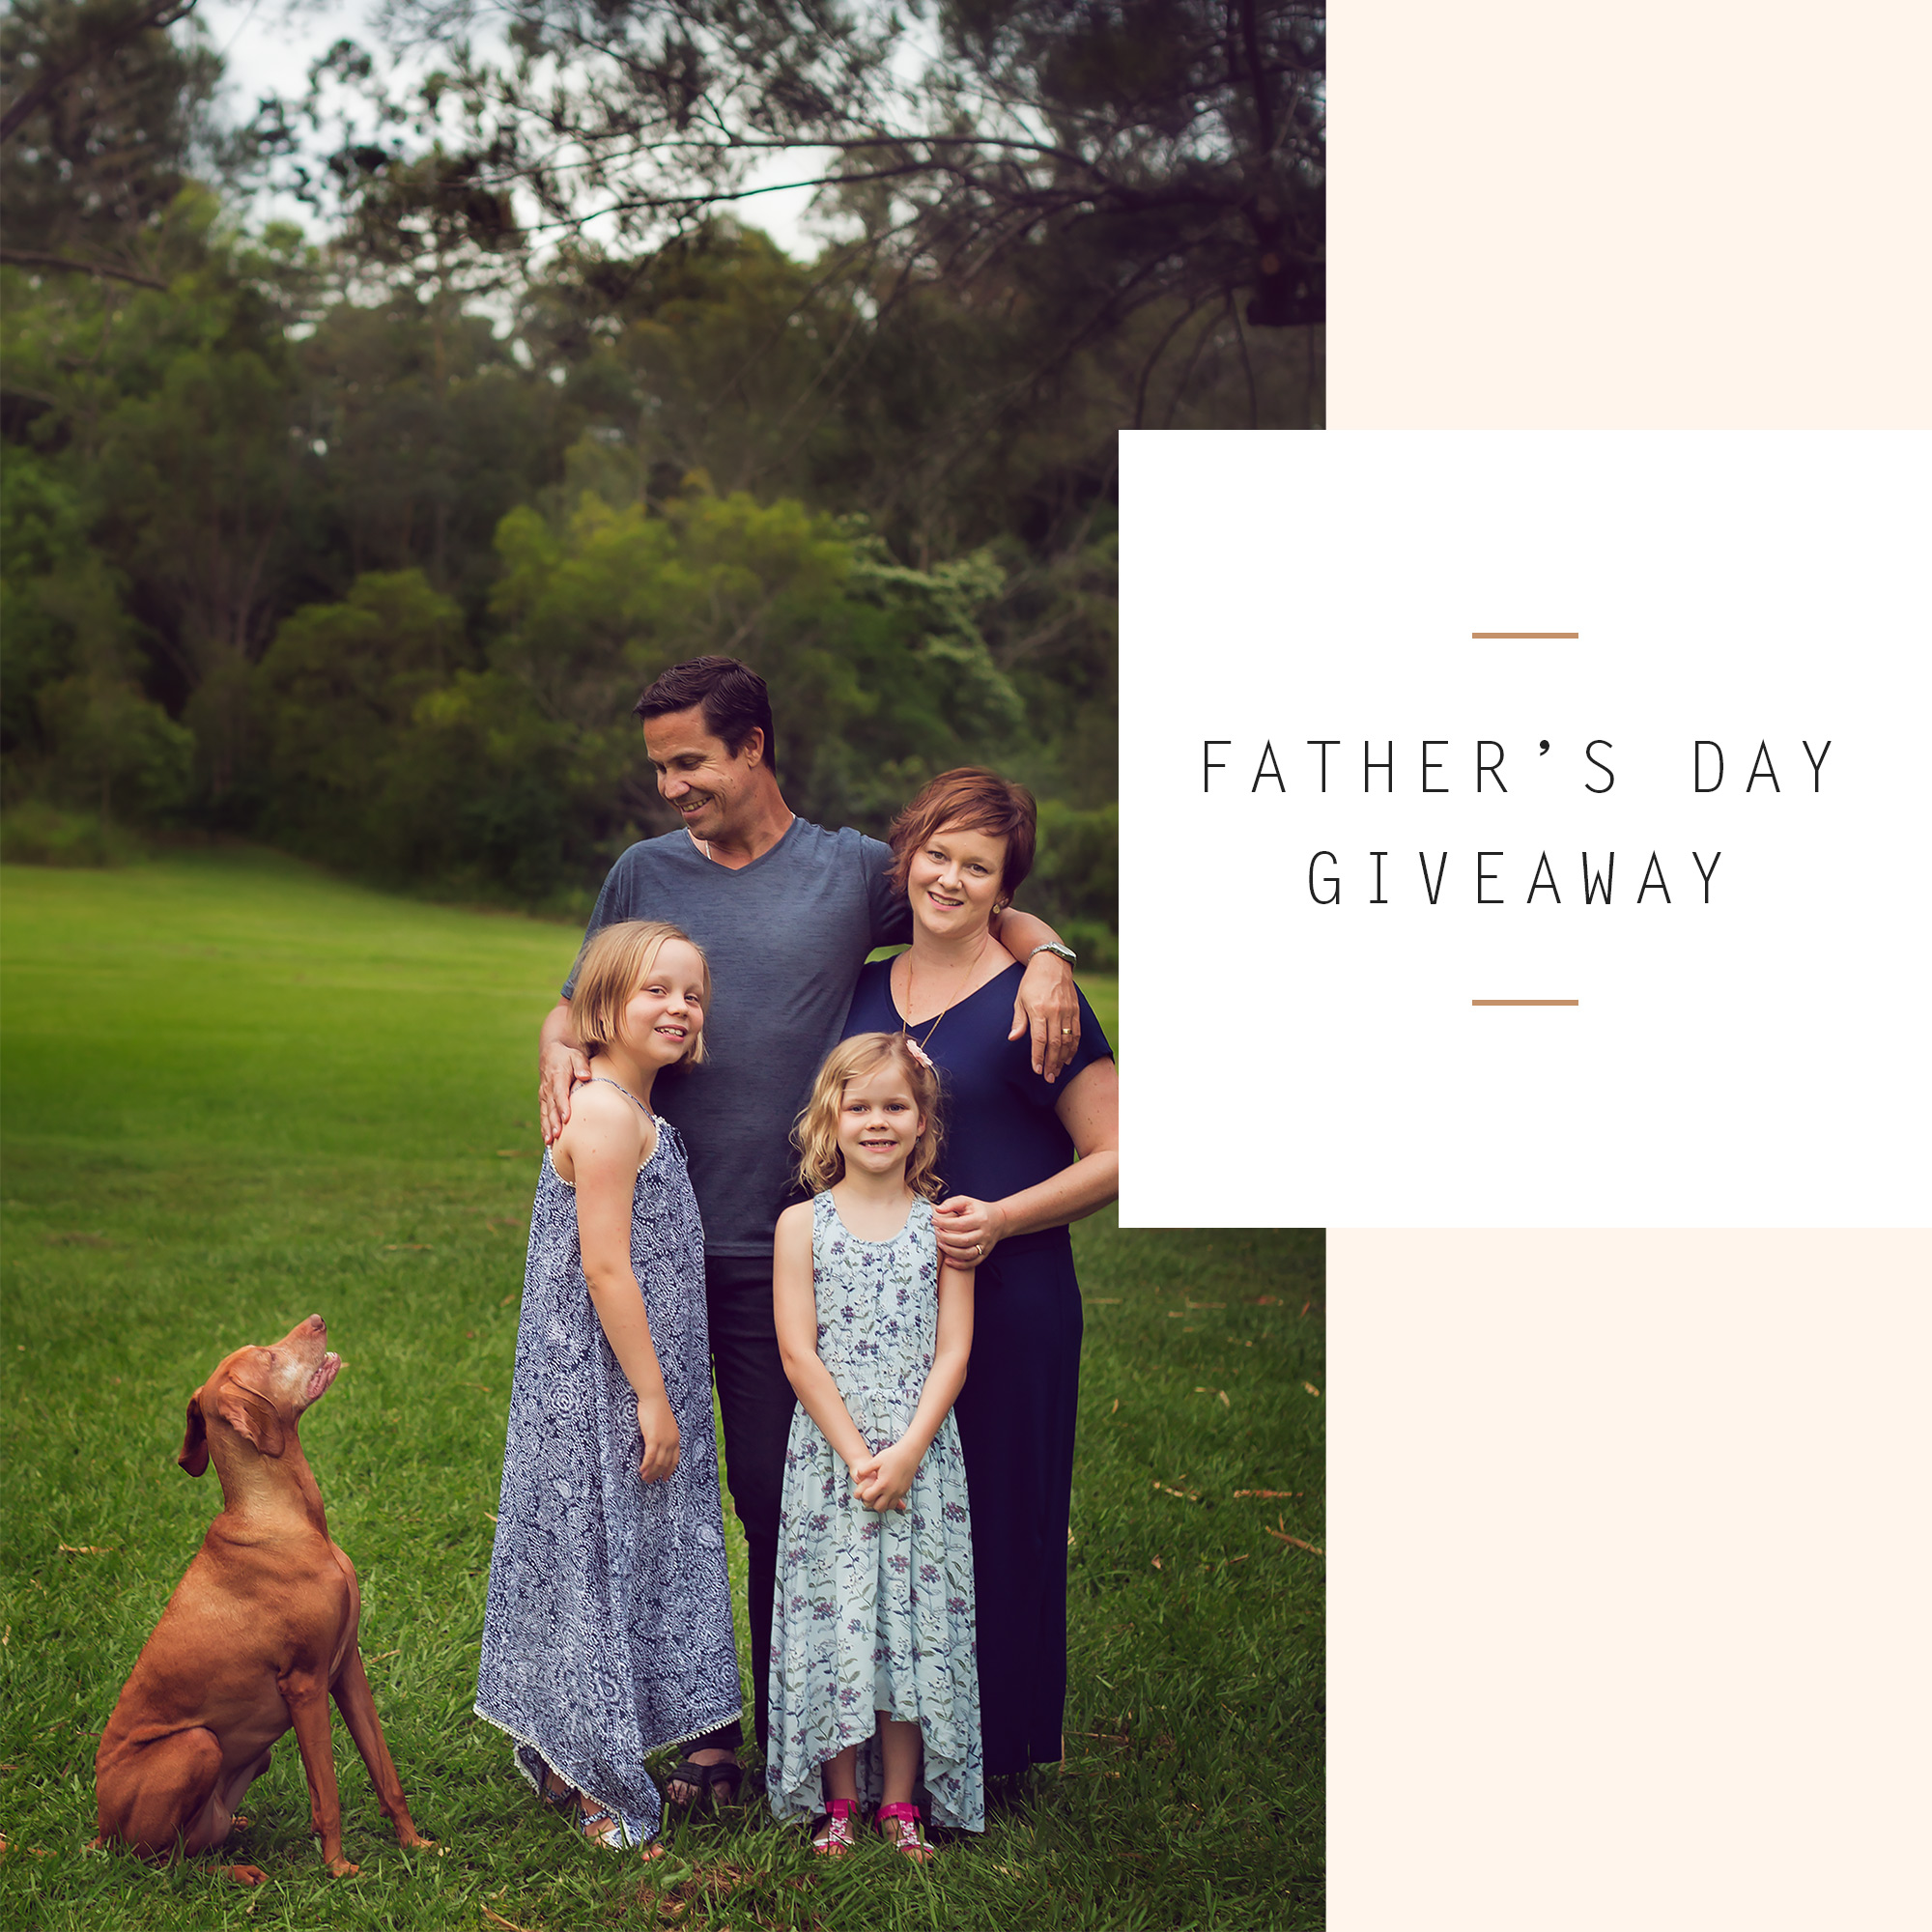 FATHER’S DAY GIVEAWAY